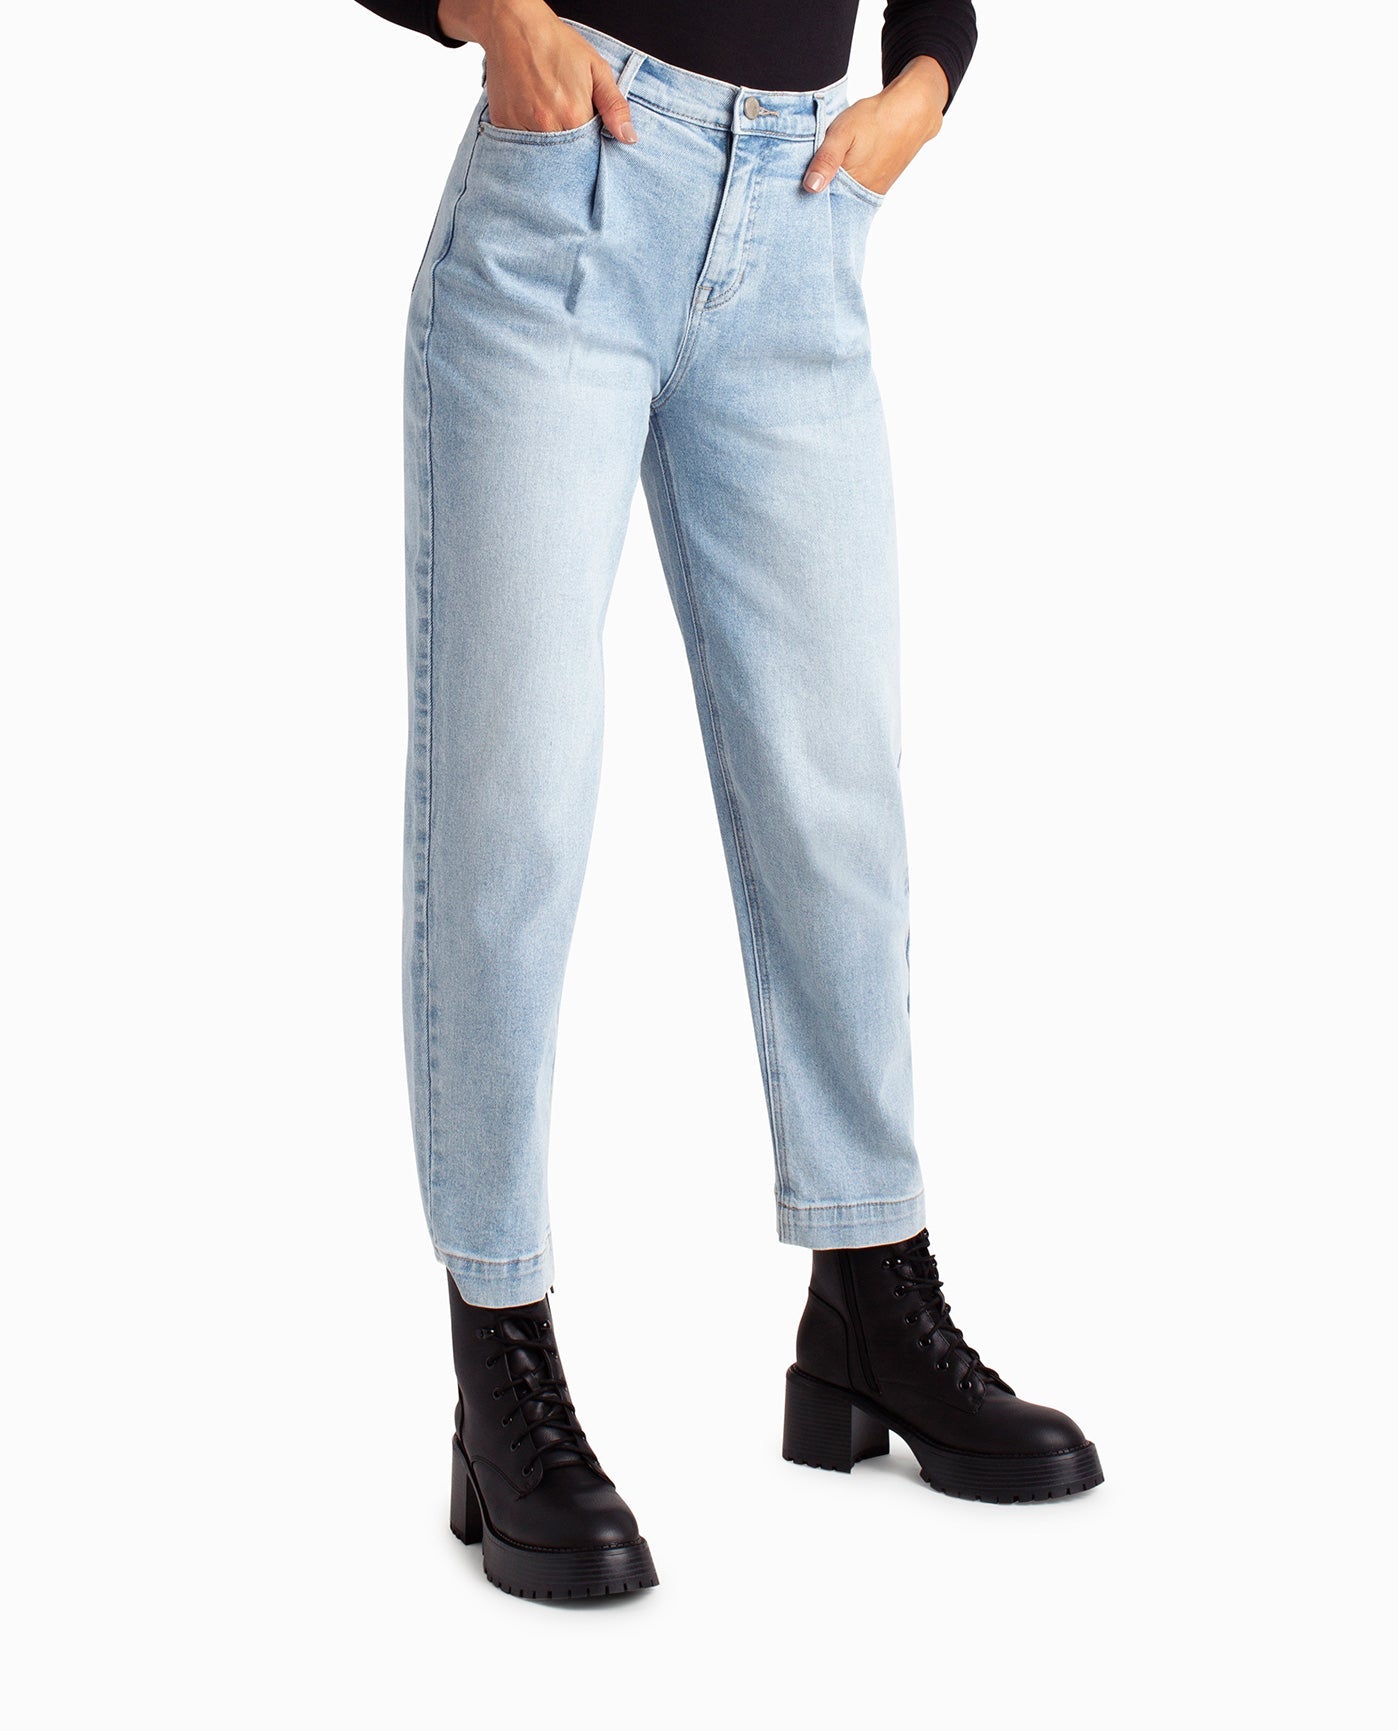 HANDS IN FRONT POCKETS OF HIGH RISE PLEATED TAPER JEAN | Light Blue